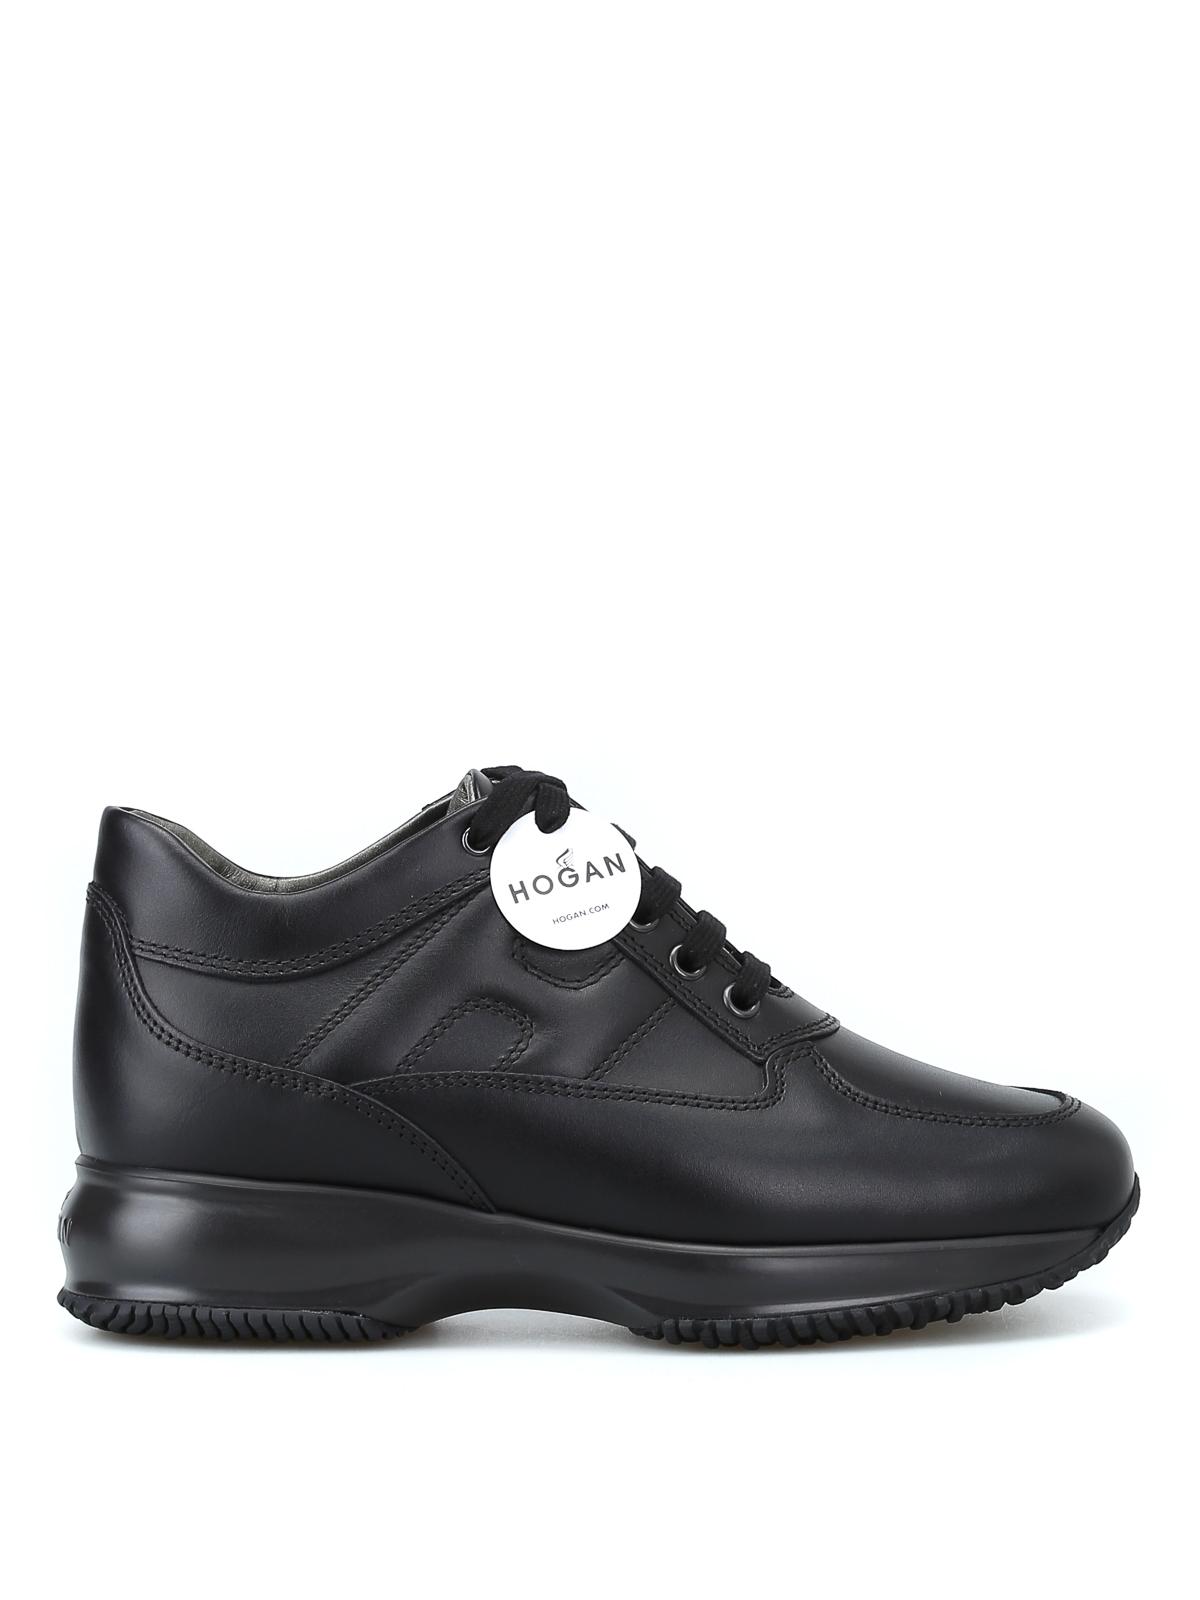 Hogan Interactive Black Leather Lace-up Sneakers - Lyst